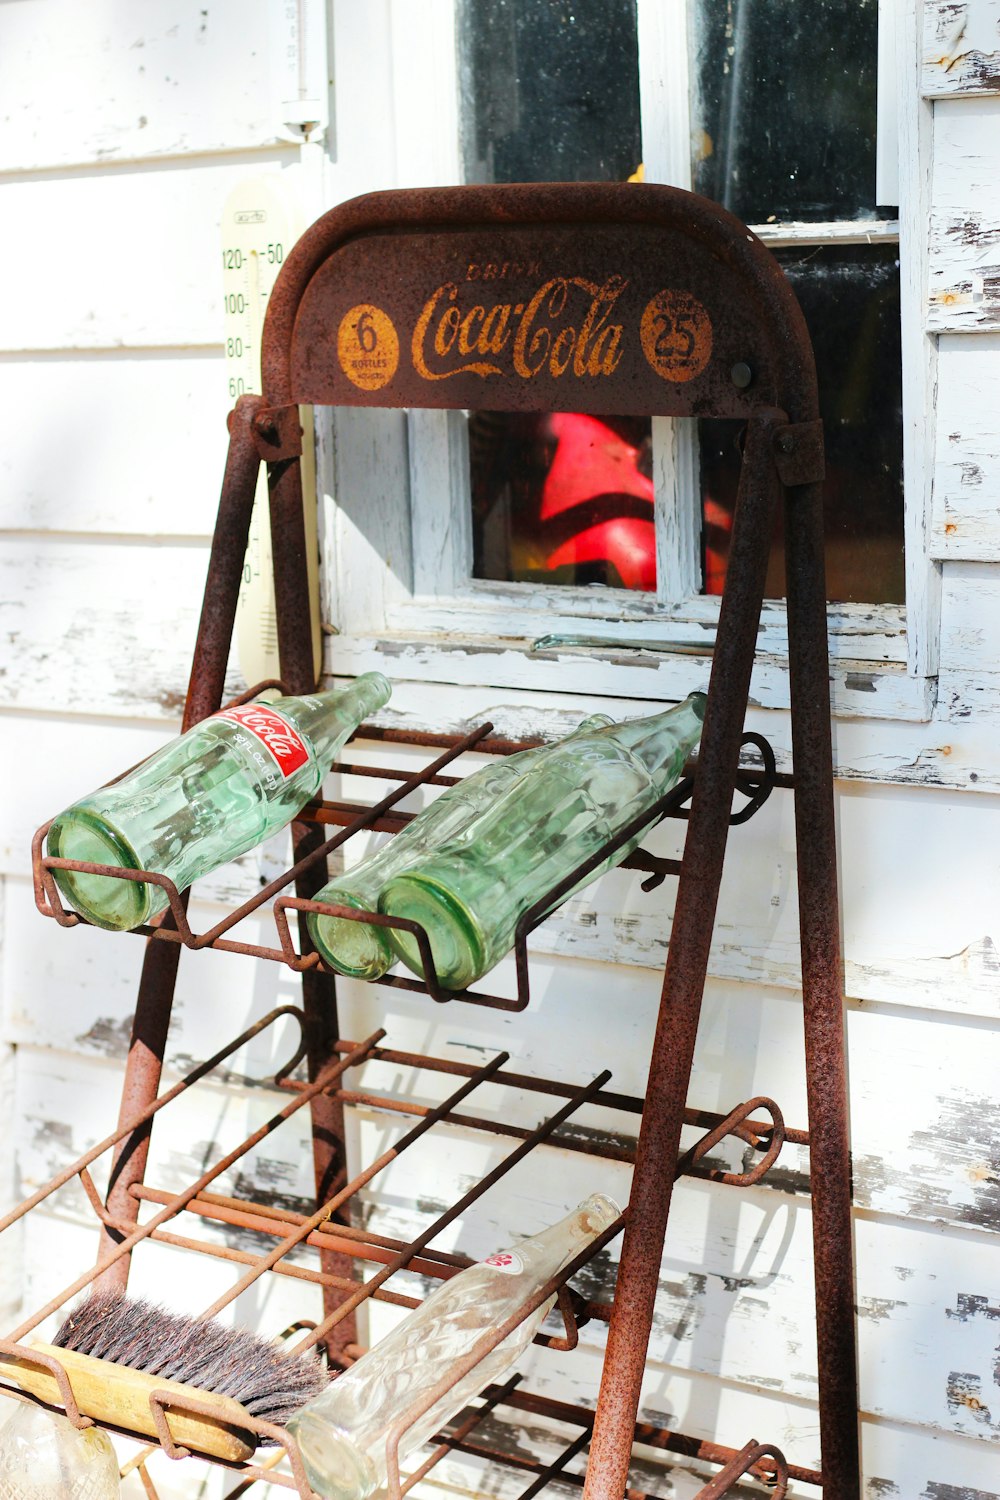 an old coca cola machine sitting outside of a building